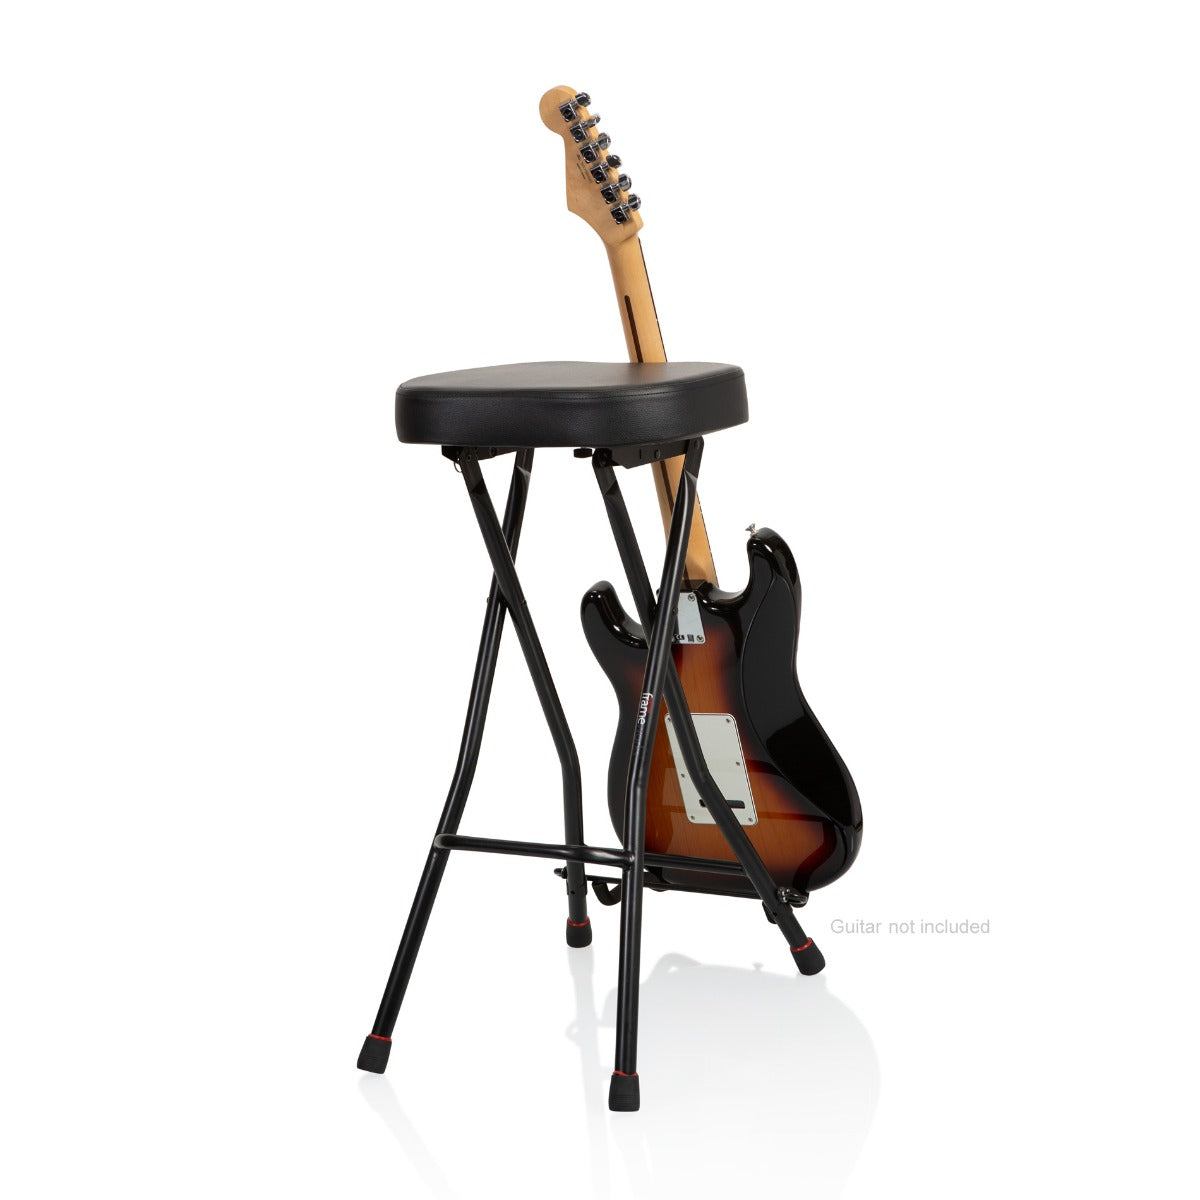 Gator Frameworks Guitar Stool with Stand with a guitar on it viewed from the back